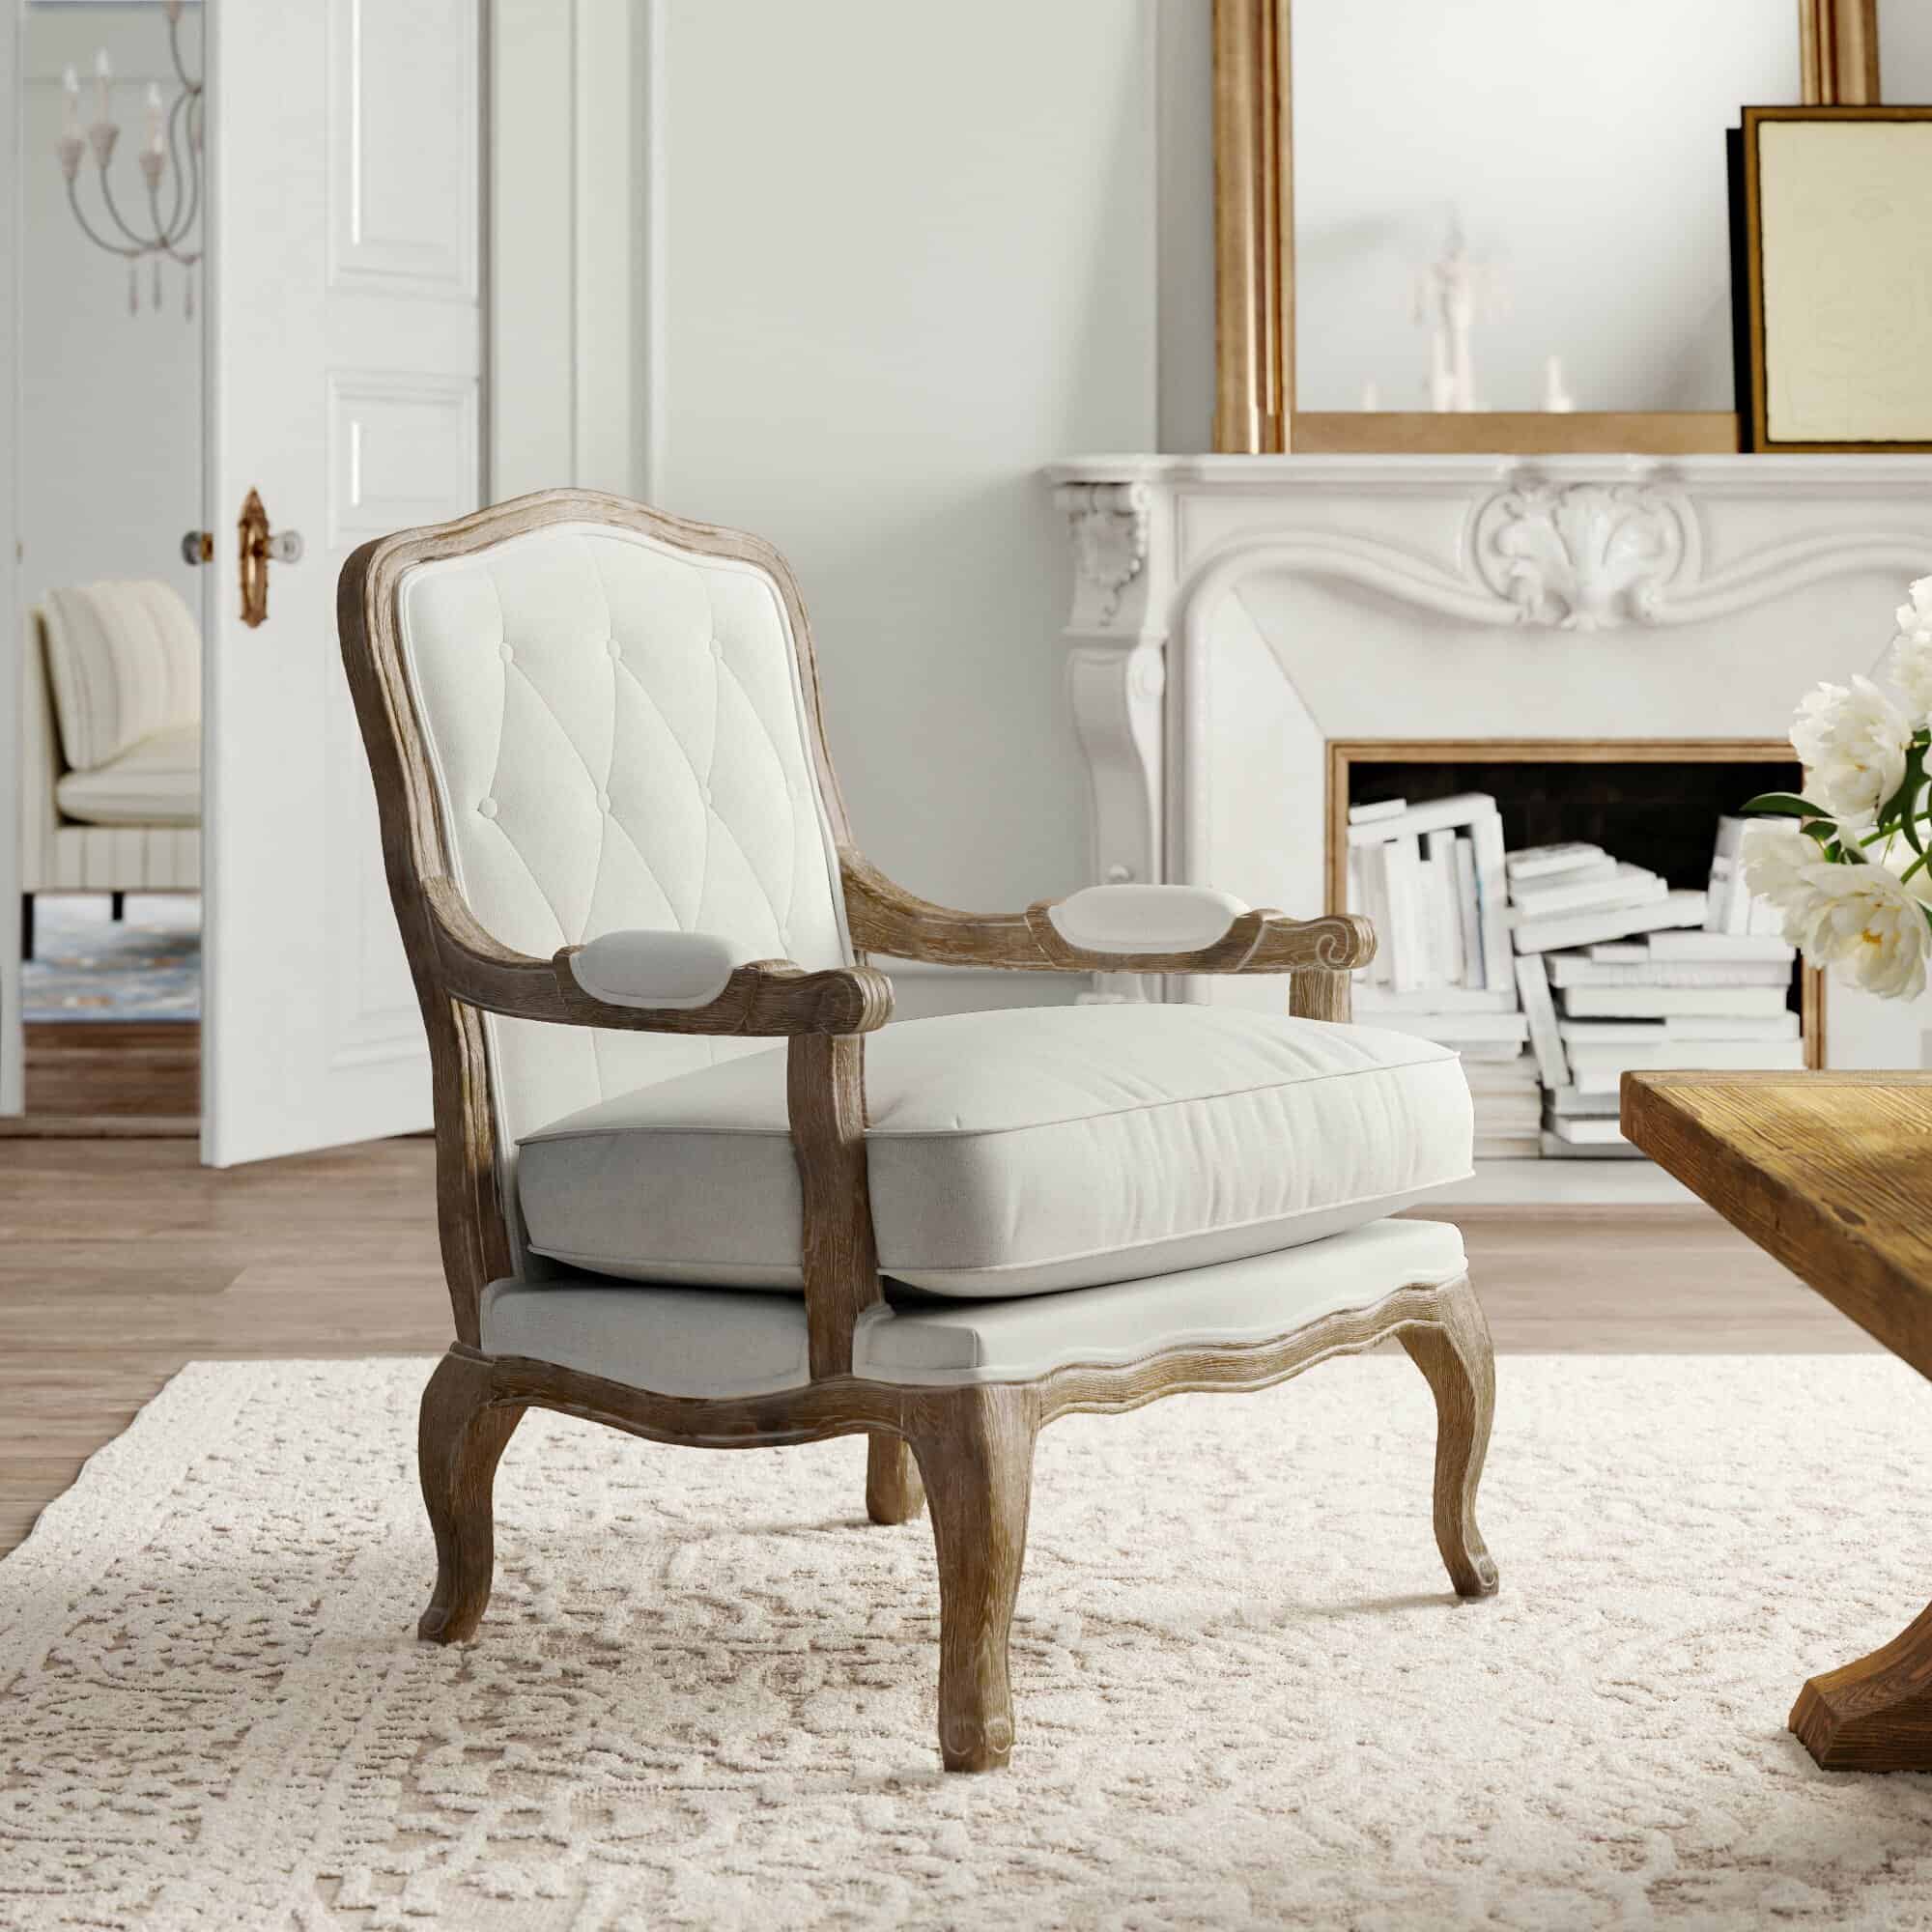 A Tufted Accent Chair Looks And Feels Regal